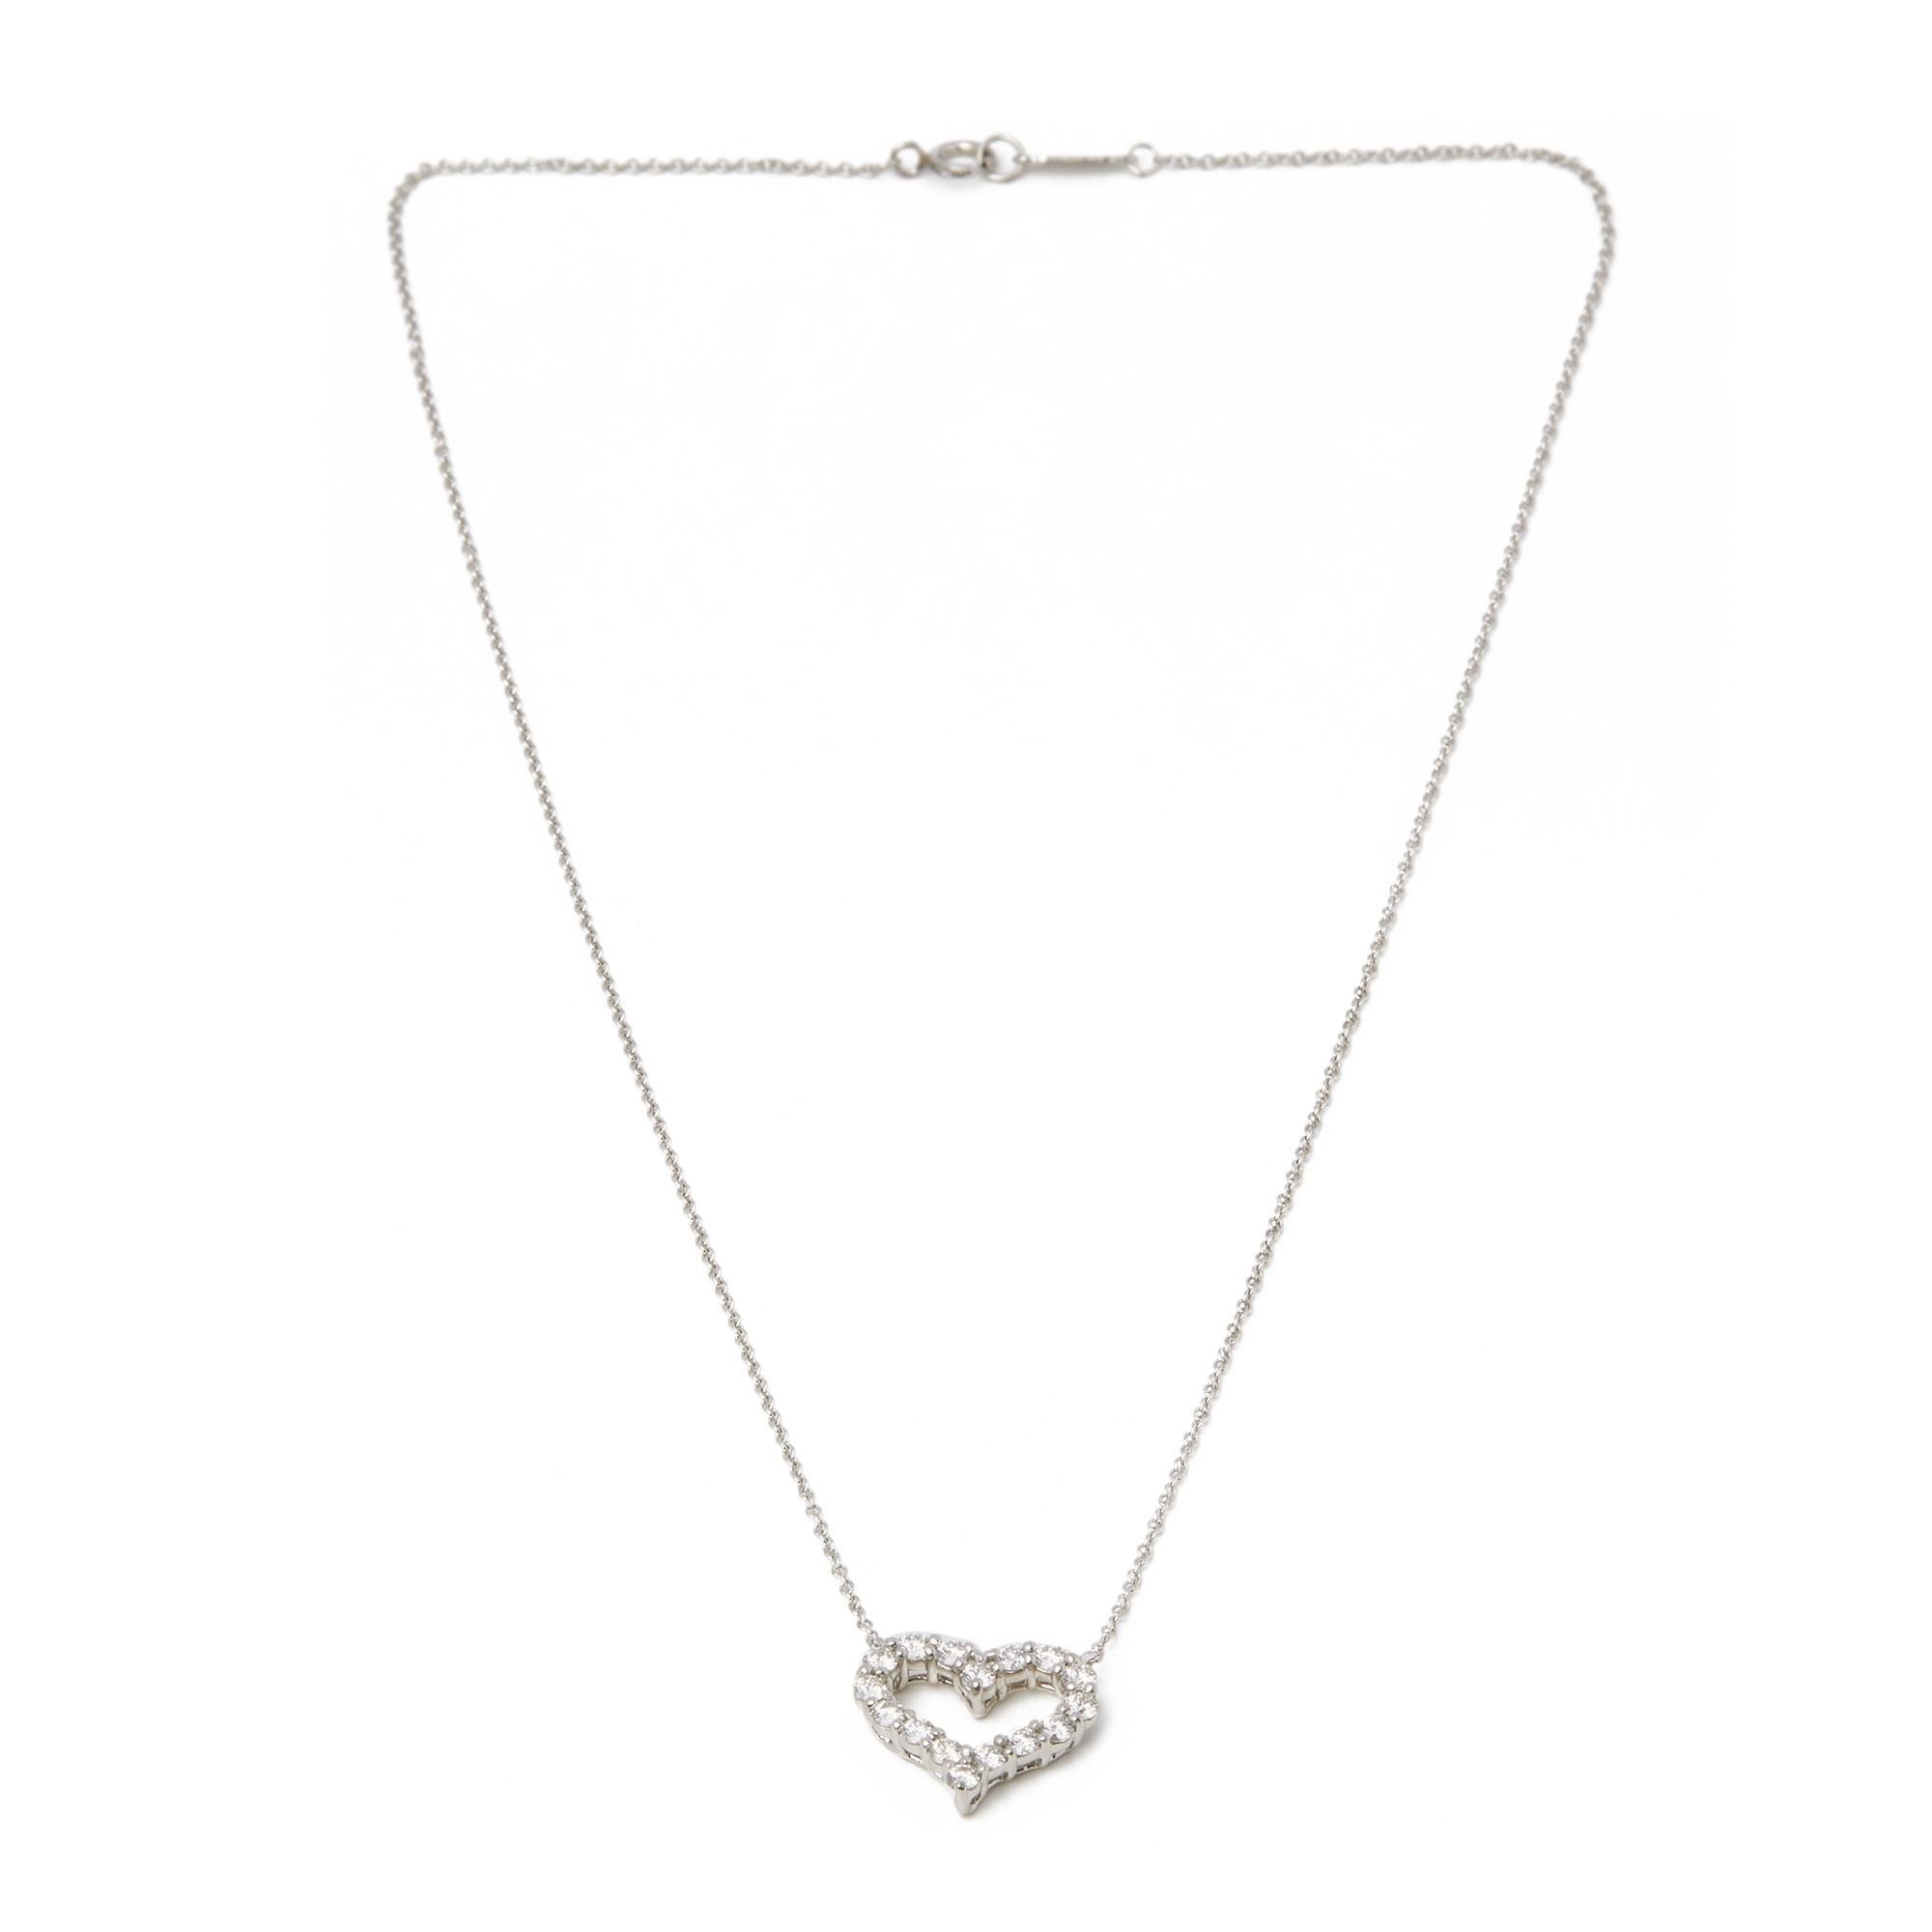 This pendant by Tiffany is from their Hearts collection and features 16 round brilliant cut diamonds set in a heart design and set in platinum with a 41cm platinum chain. Complete with Tiffany pouch, box and bag. Our Xupes reference is J516 should